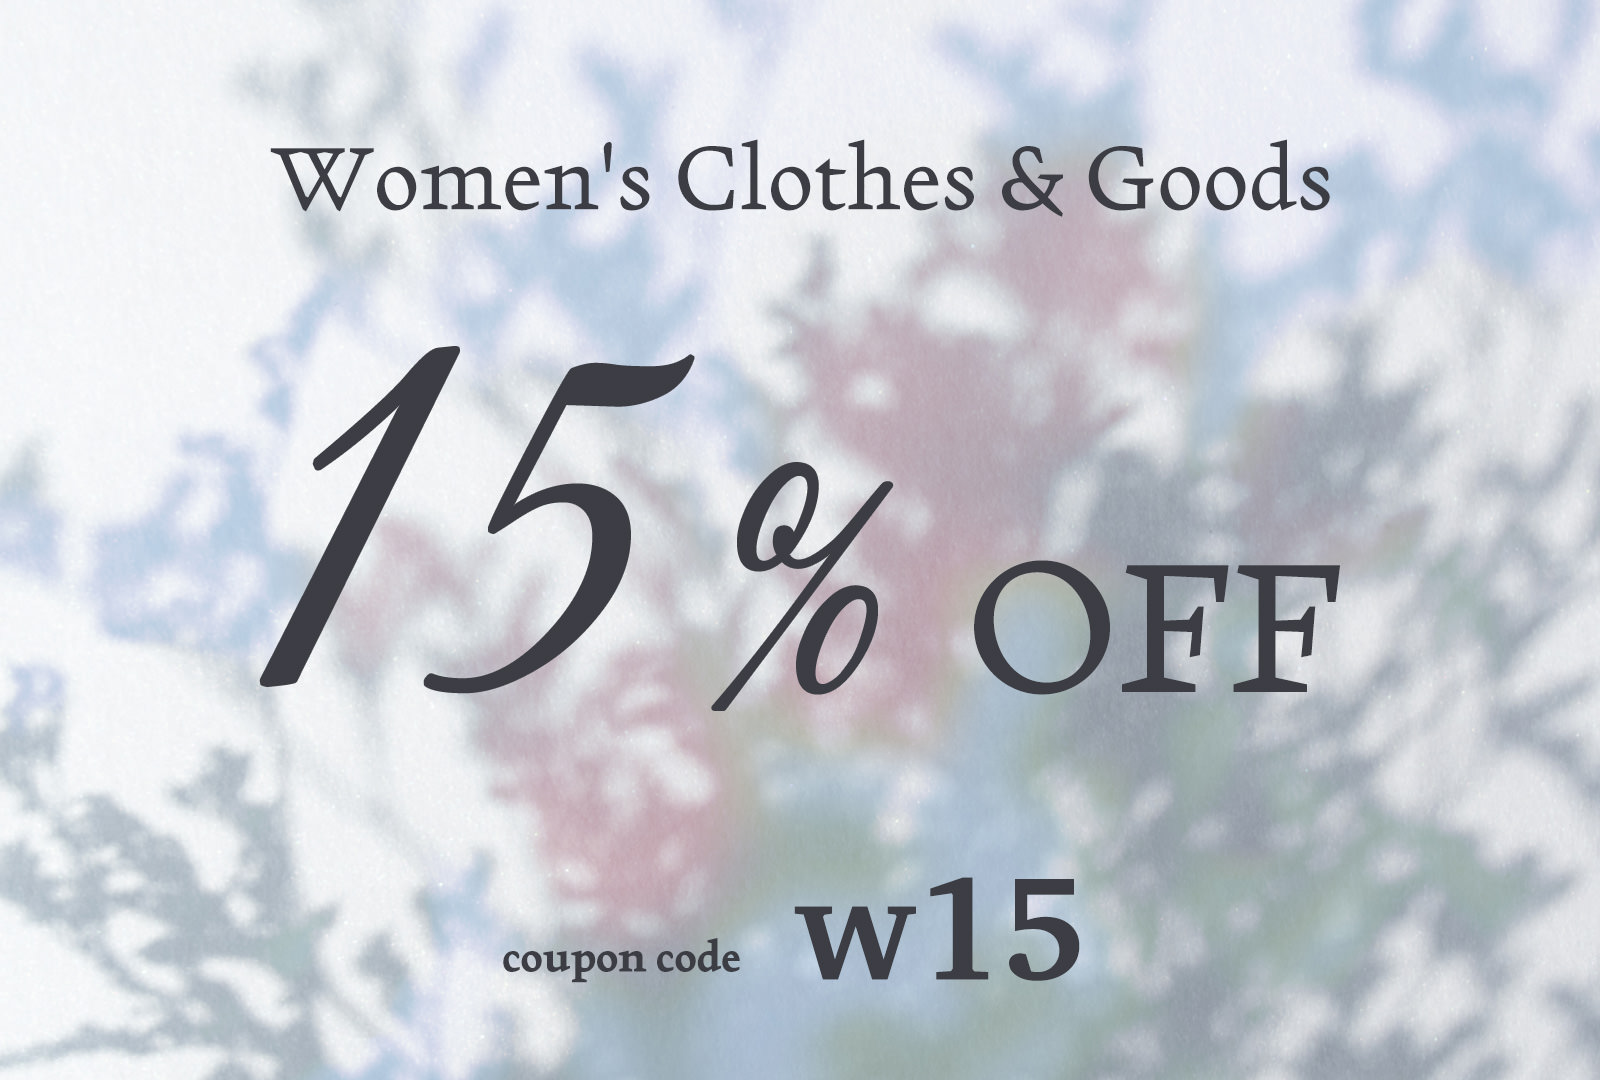 Woman's Clothes & goods 15%off Coupon!